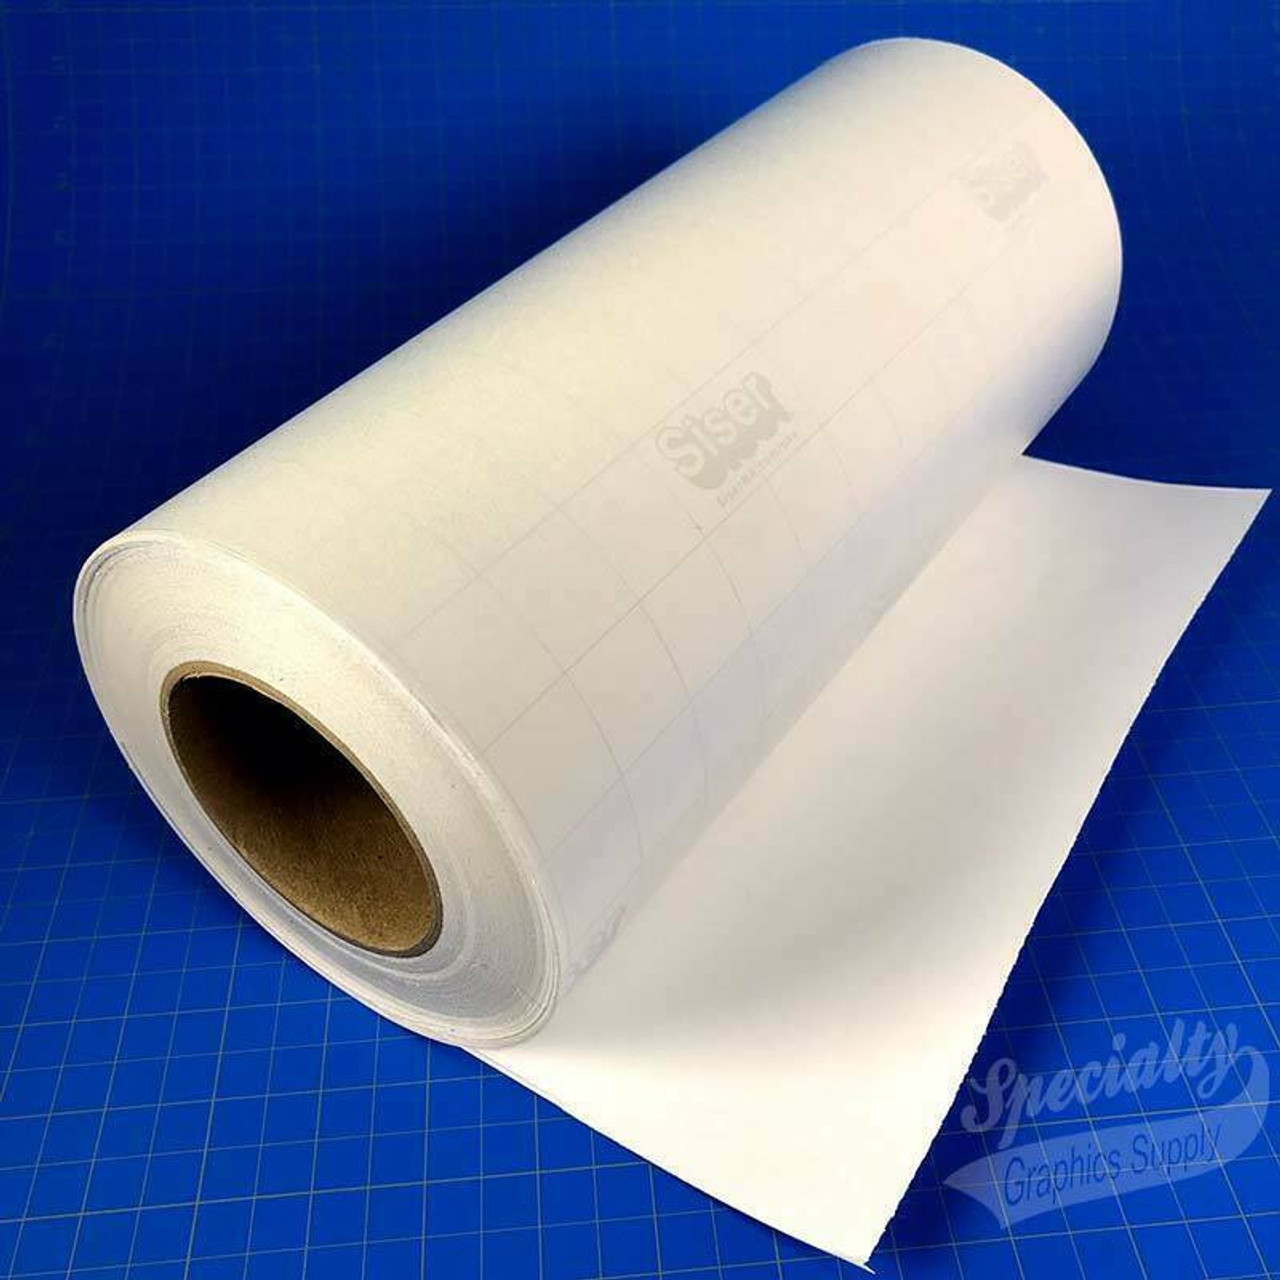 Permanent Adhesive Vinyl 24 X 10 Yards Roll for Cricut Vinyl Silhouette and  Cameo Cutters Self Adhesive Matte Vinyl for DIY 